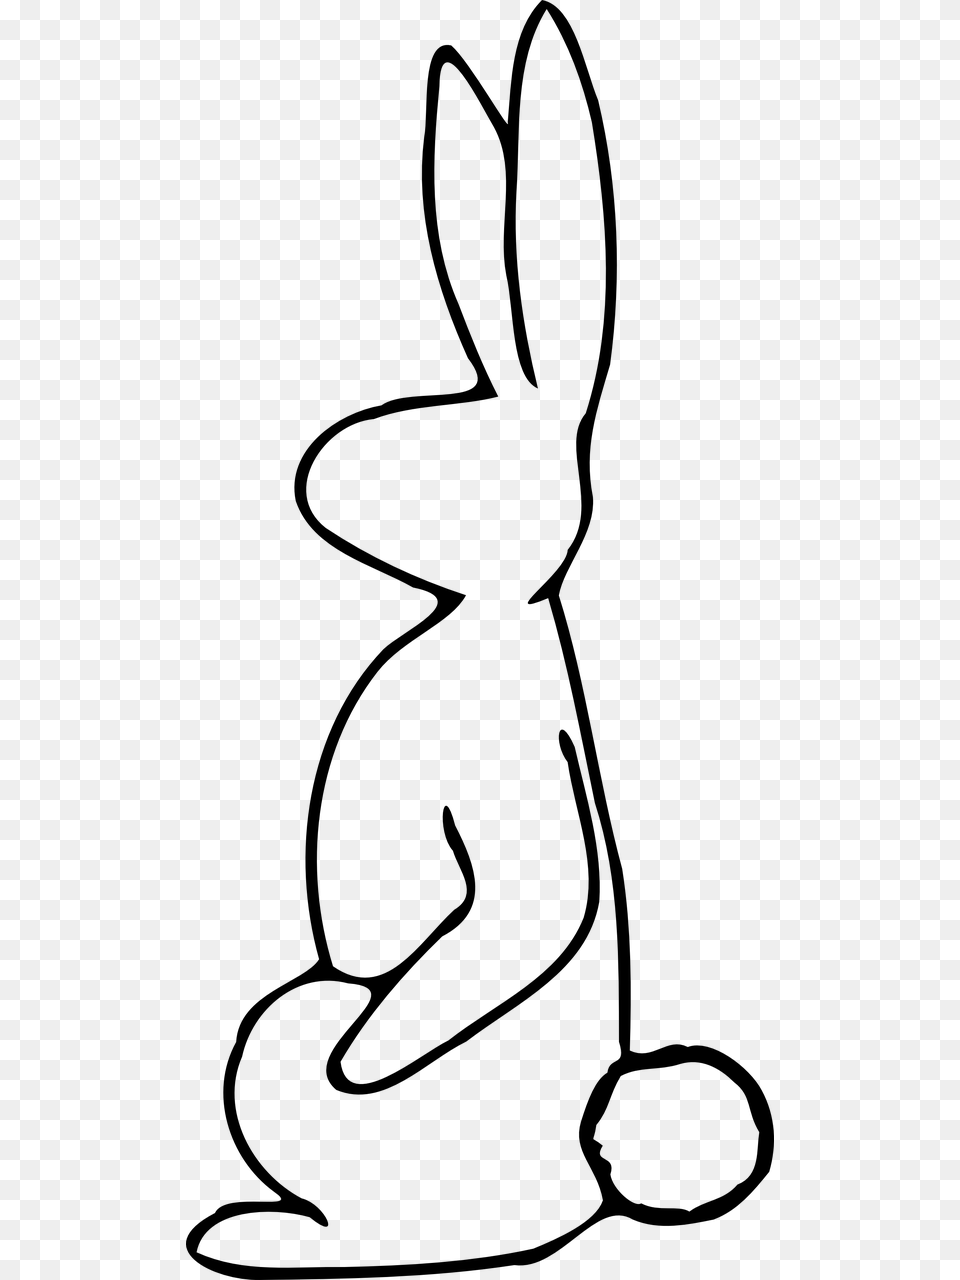 Outline Of An Animal, Gray Png